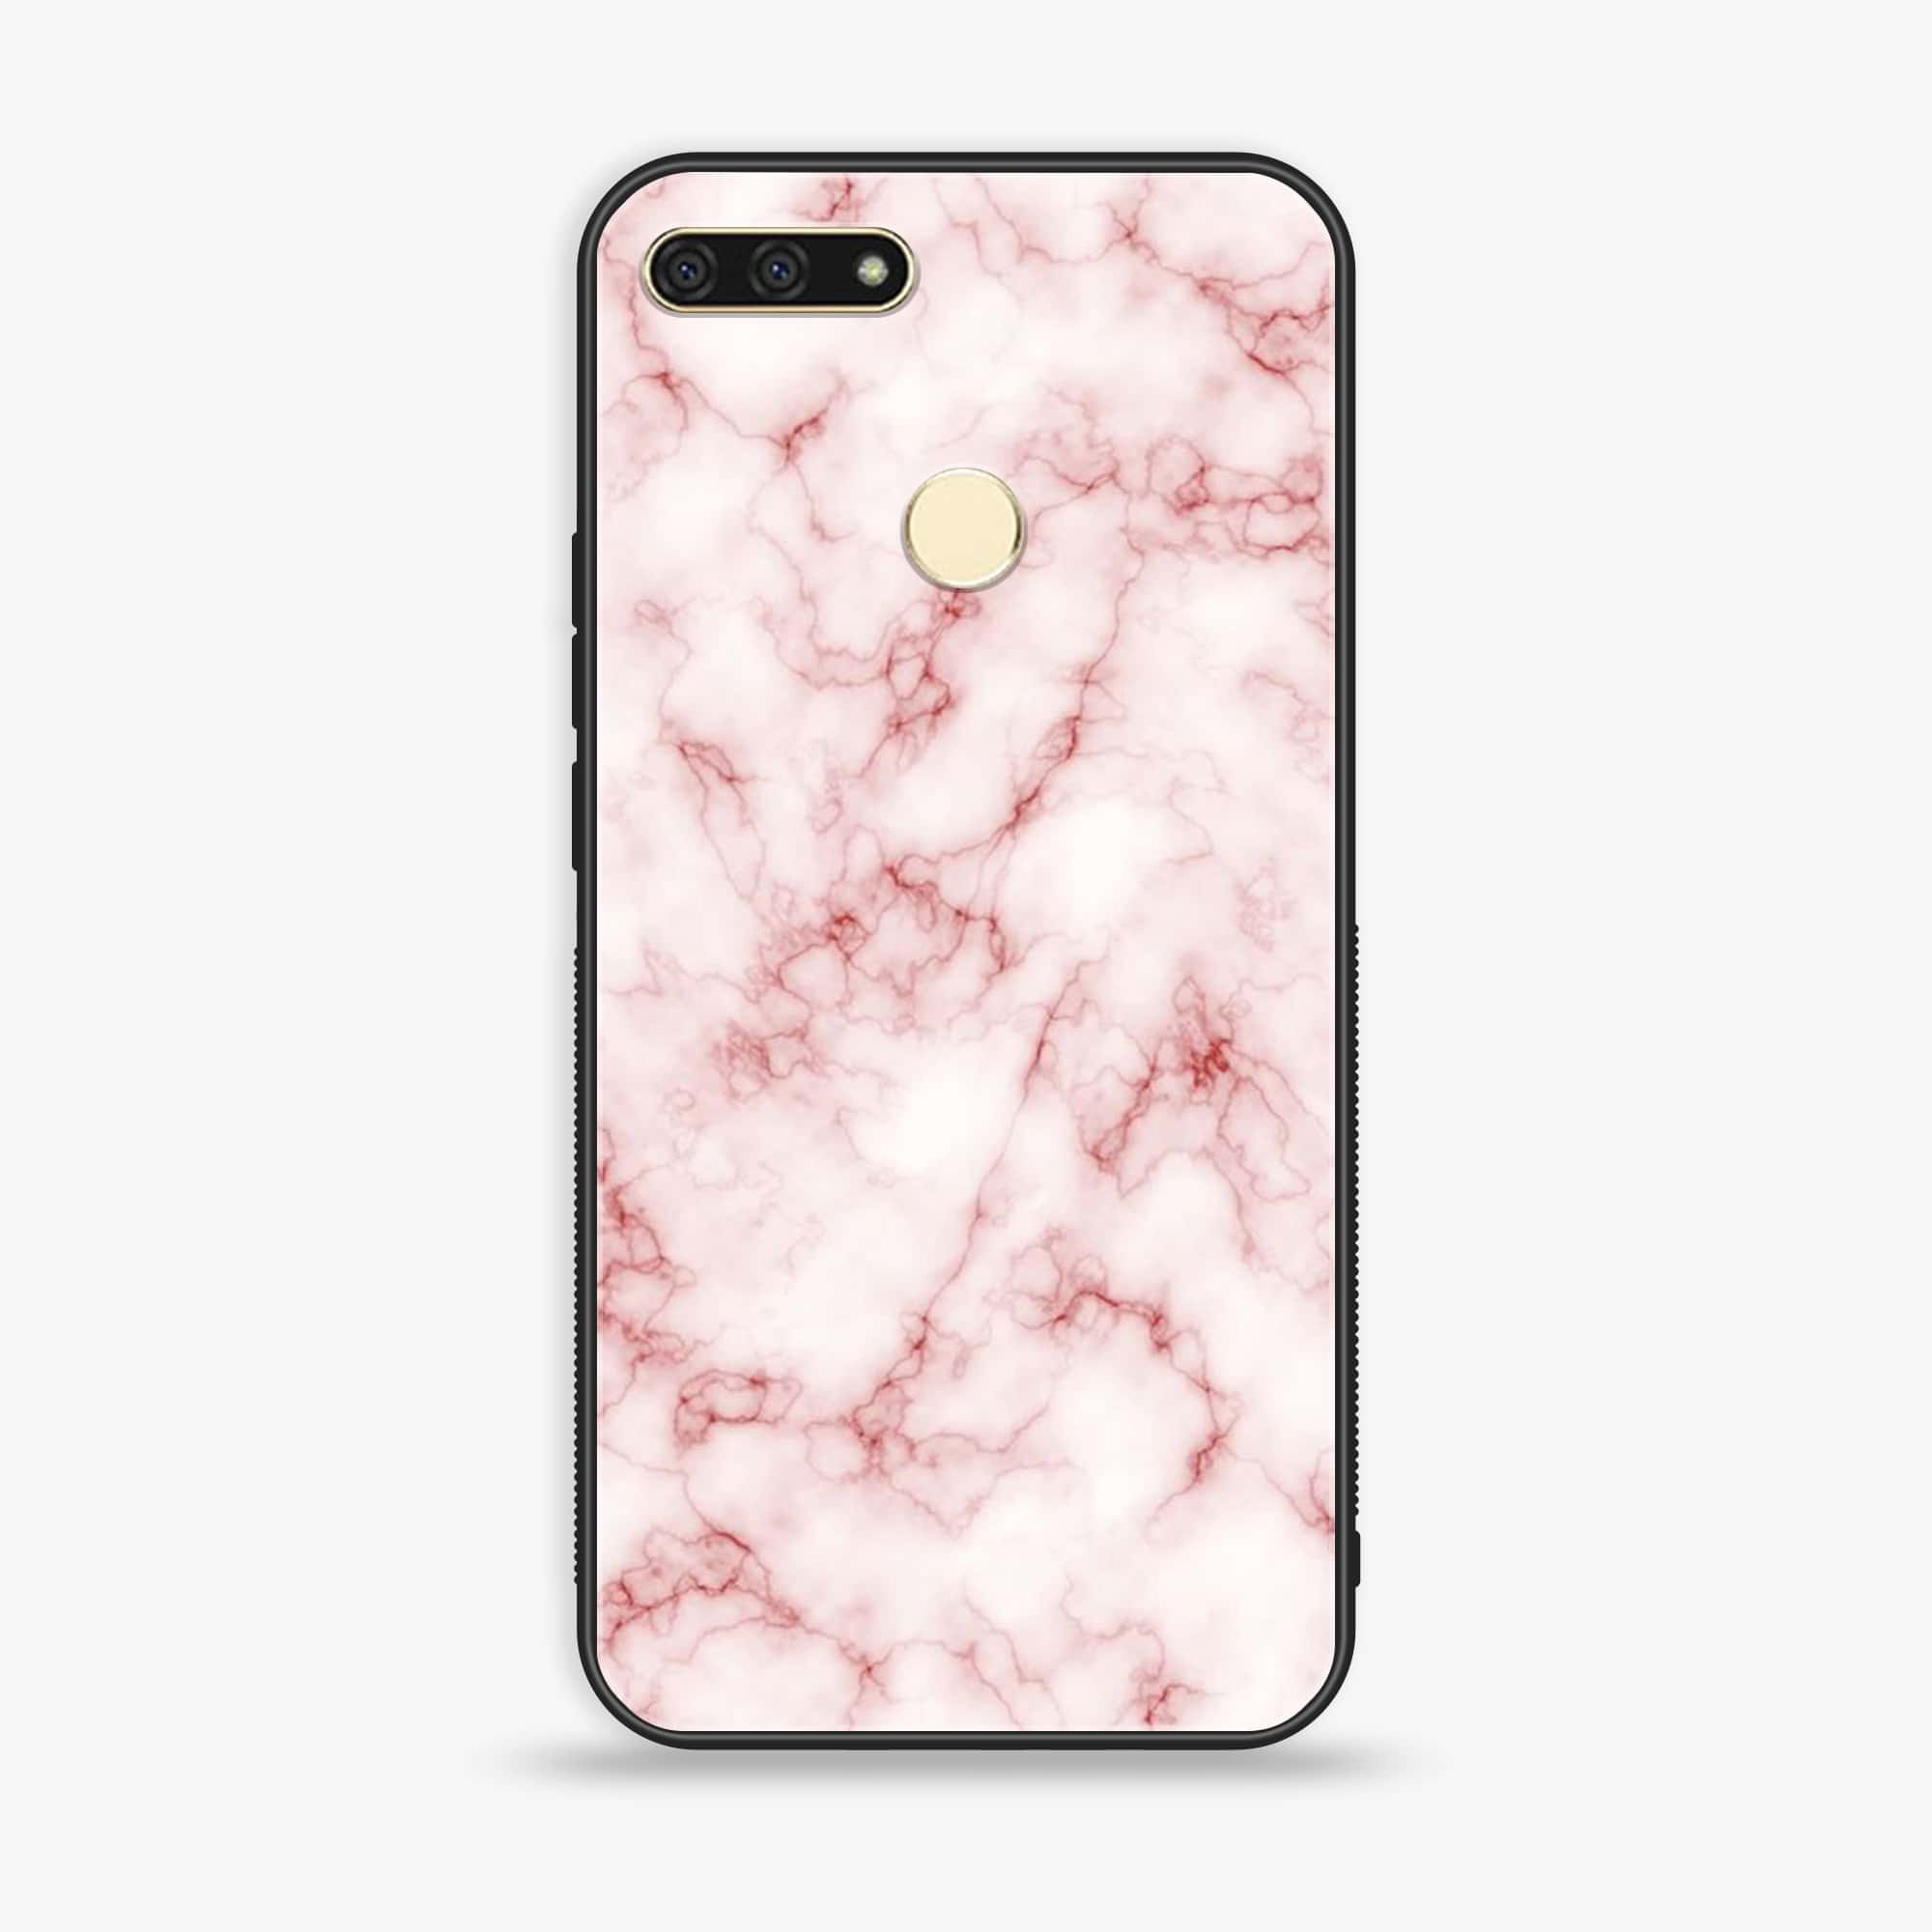 Honor 7A - Pink Marble Series - Premium Printed Glass soft Bumper shock Proof Case